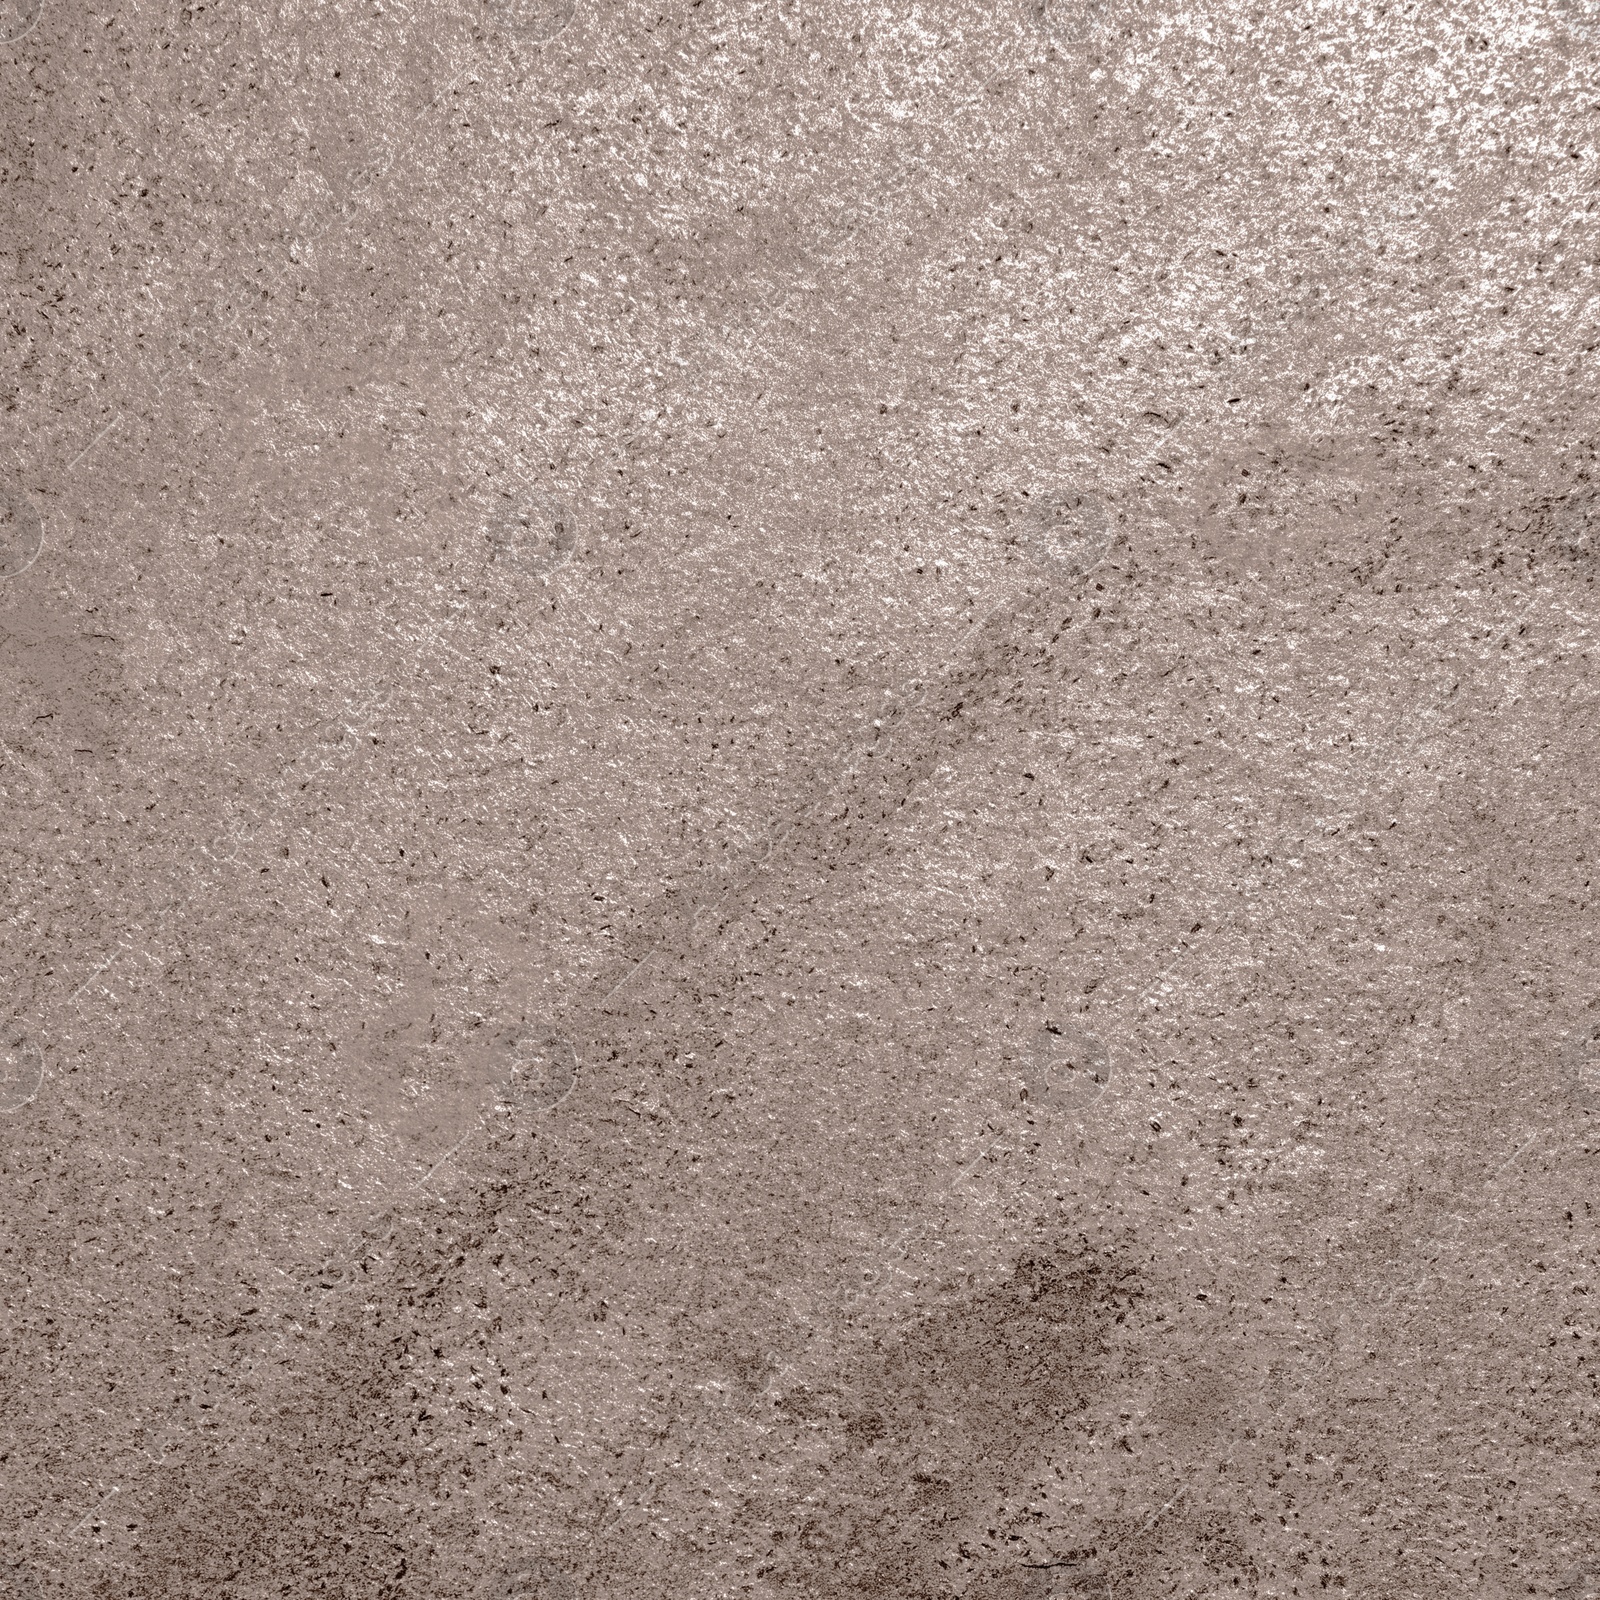 Image of Wall paper design. Texture of brown stone surface as background